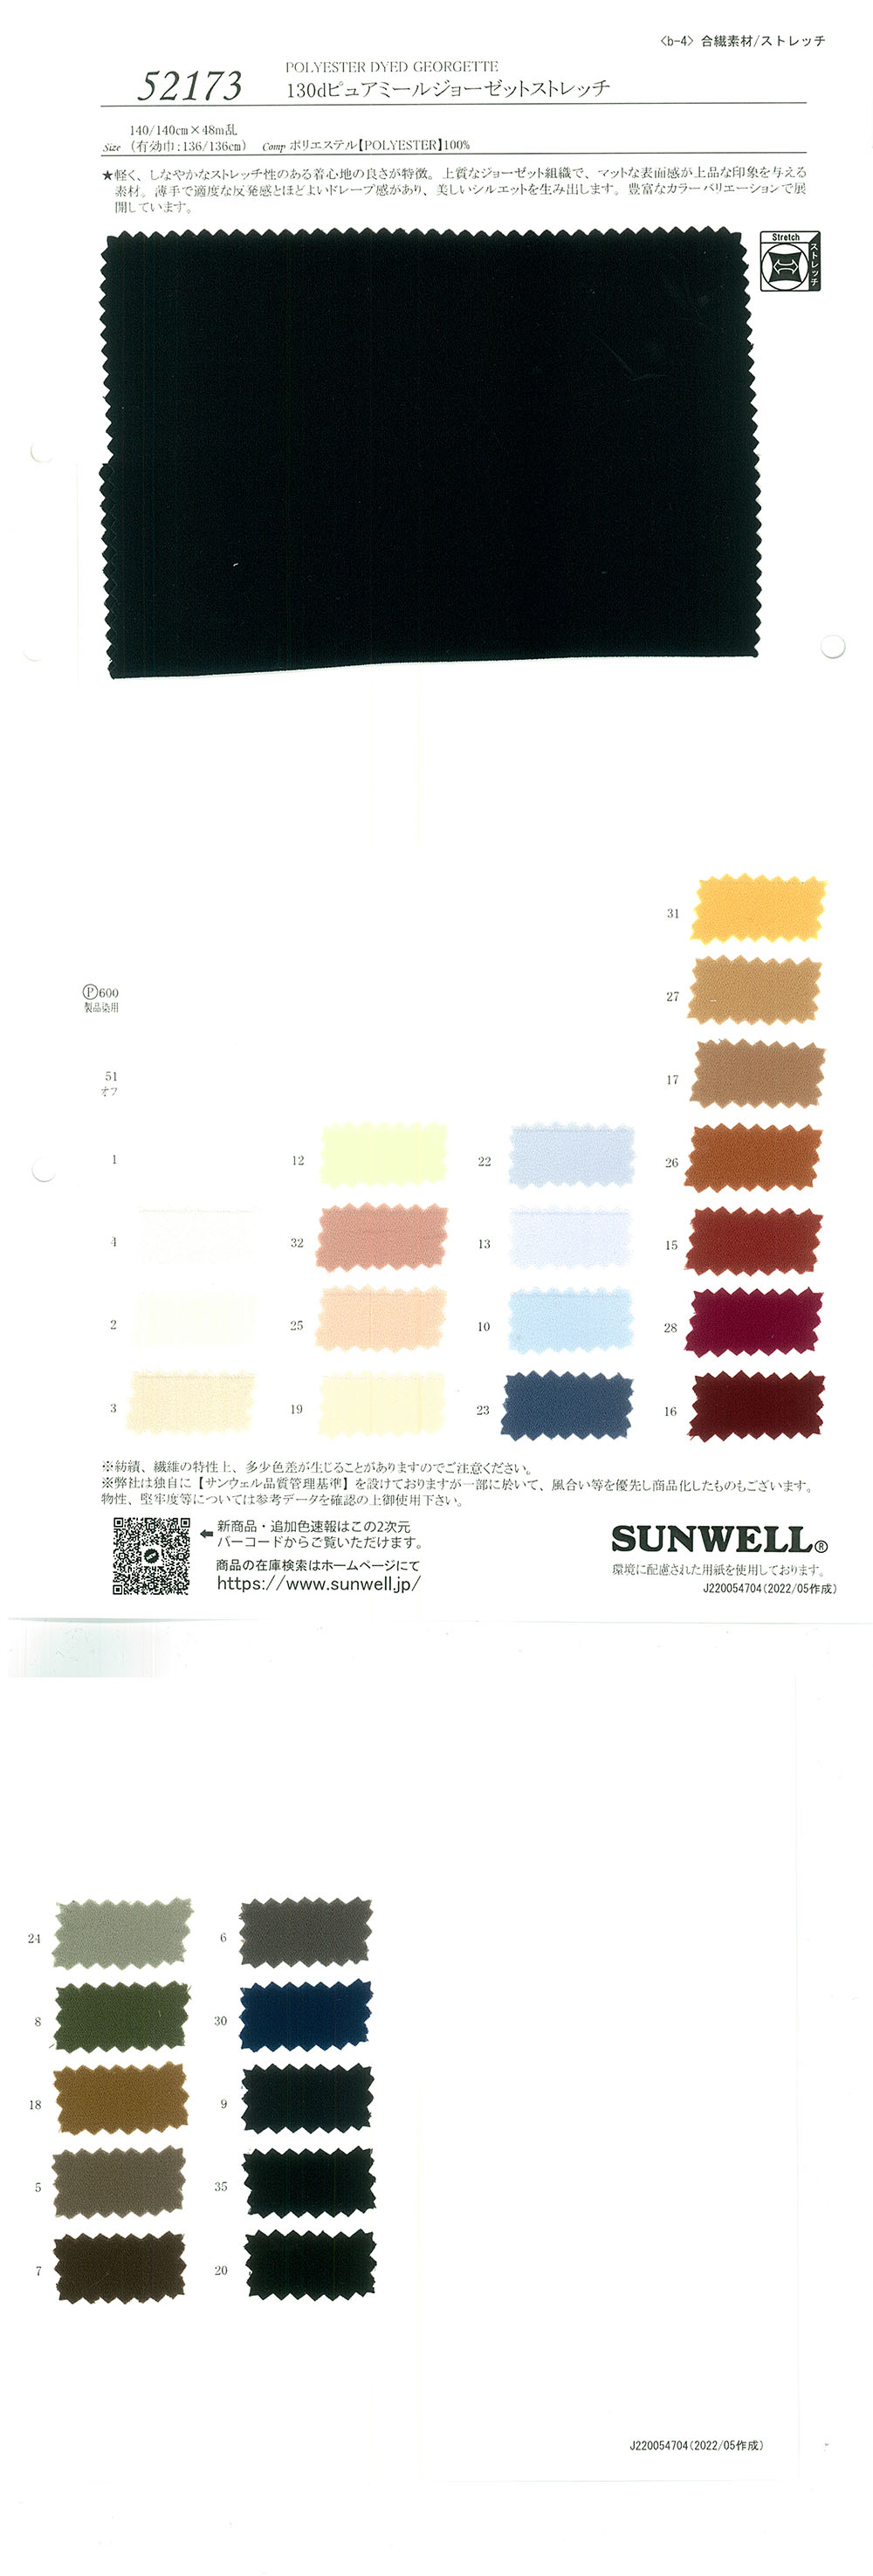 52173 130d Pure Meal Georgette Stretch[Textile / Fabric] SUNWELL